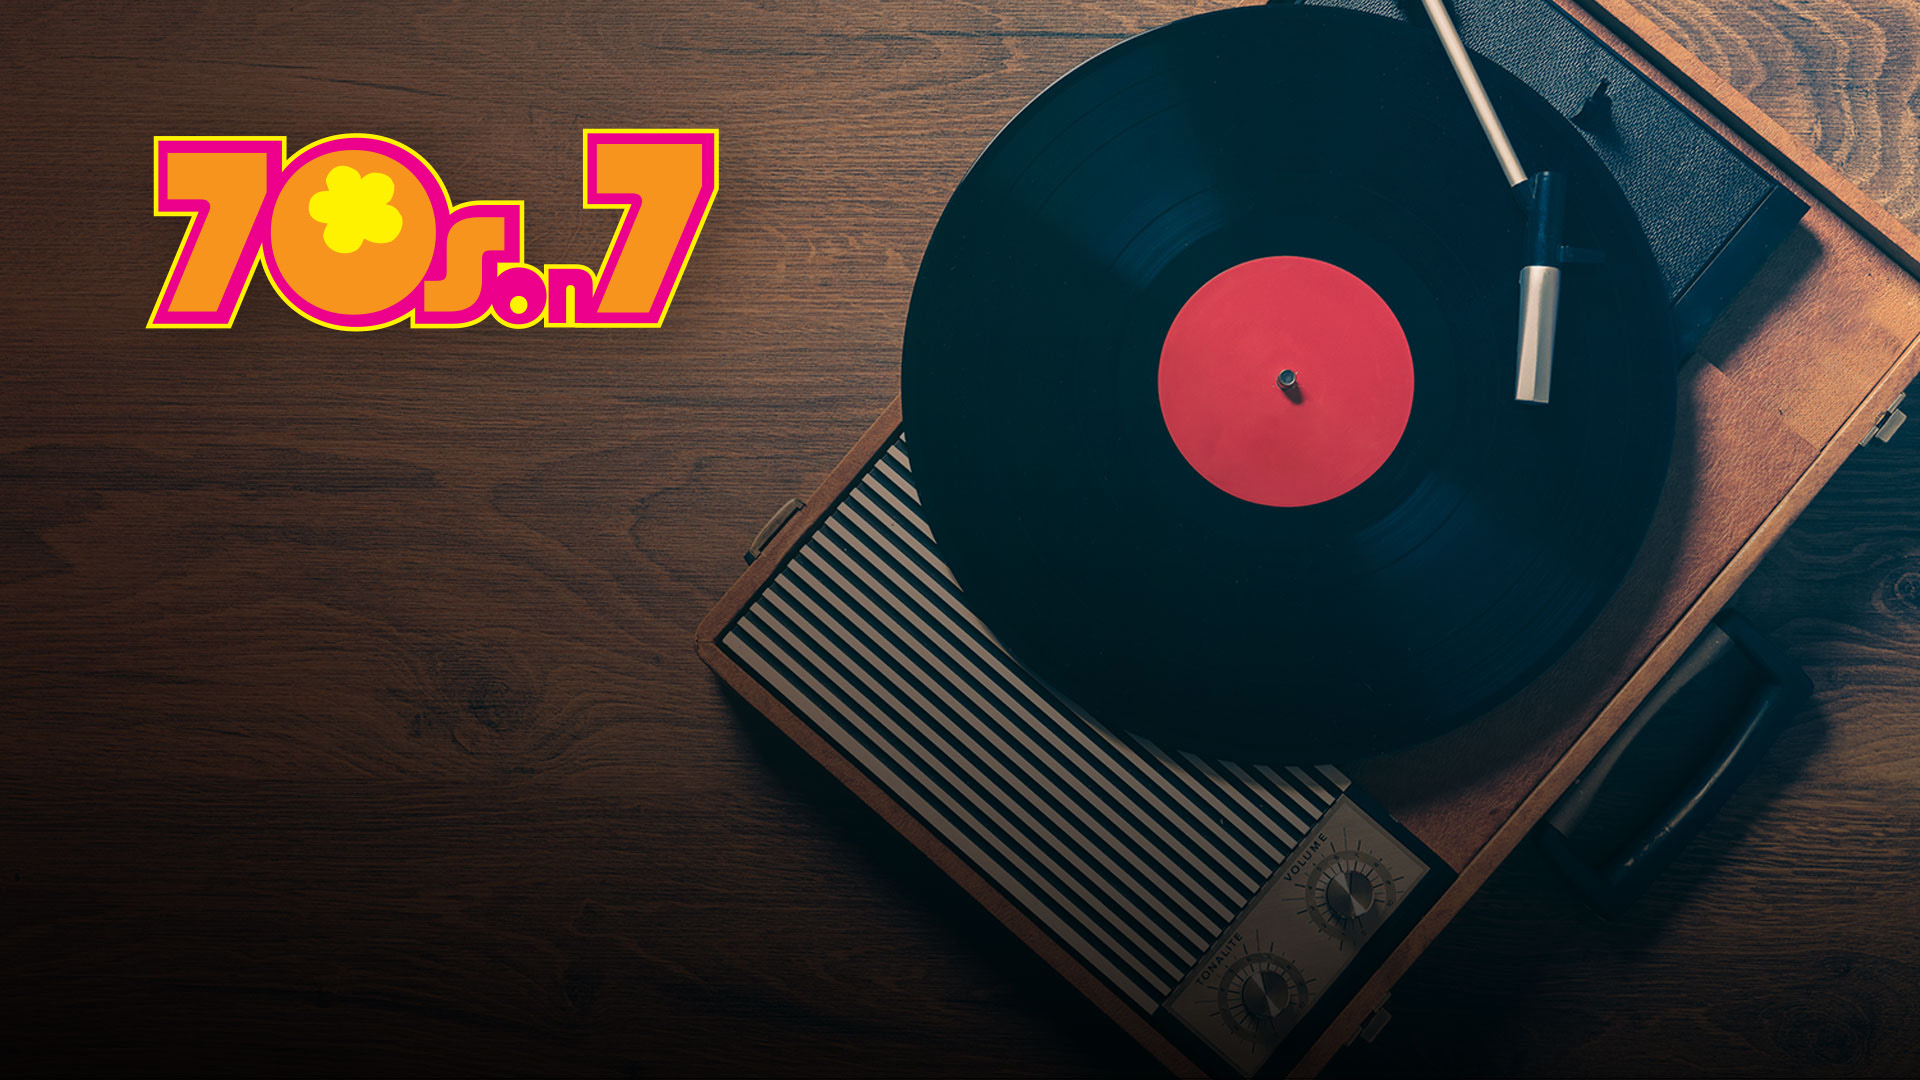 SiriusXM 70s on 7 logo on a photo of a 45 record